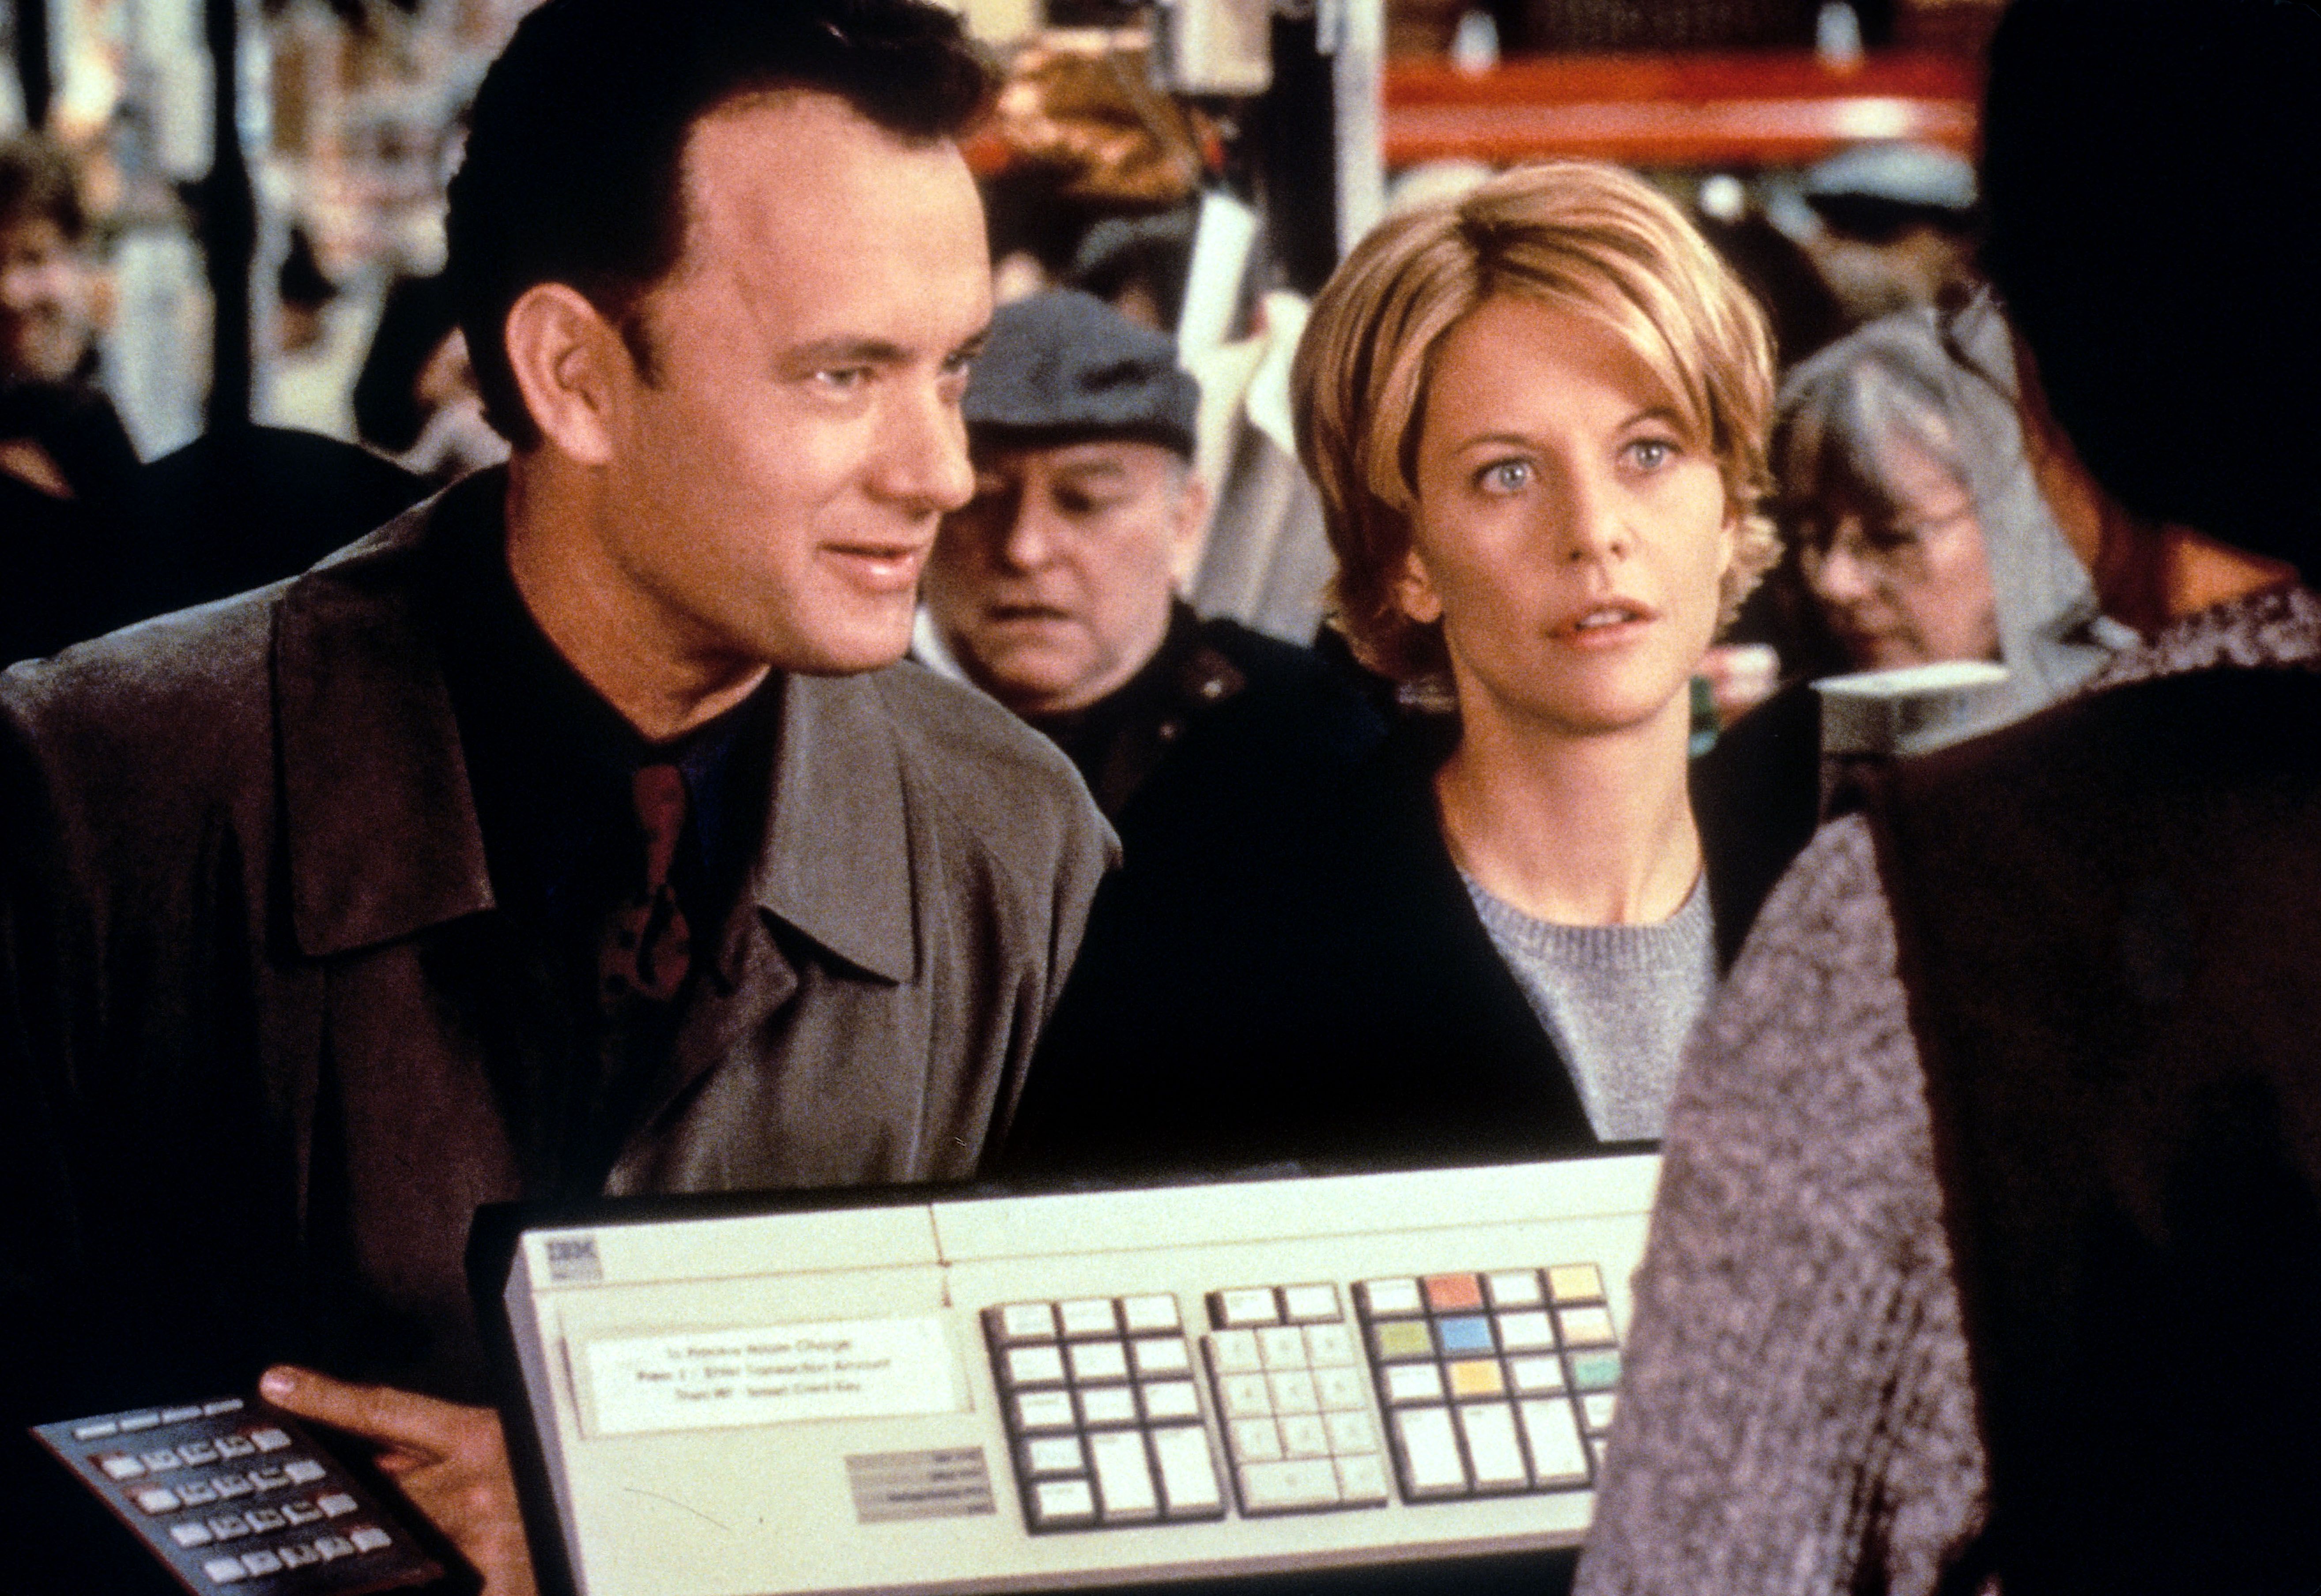 This Is What You've Got Mail Would Look Like 20 Years Later